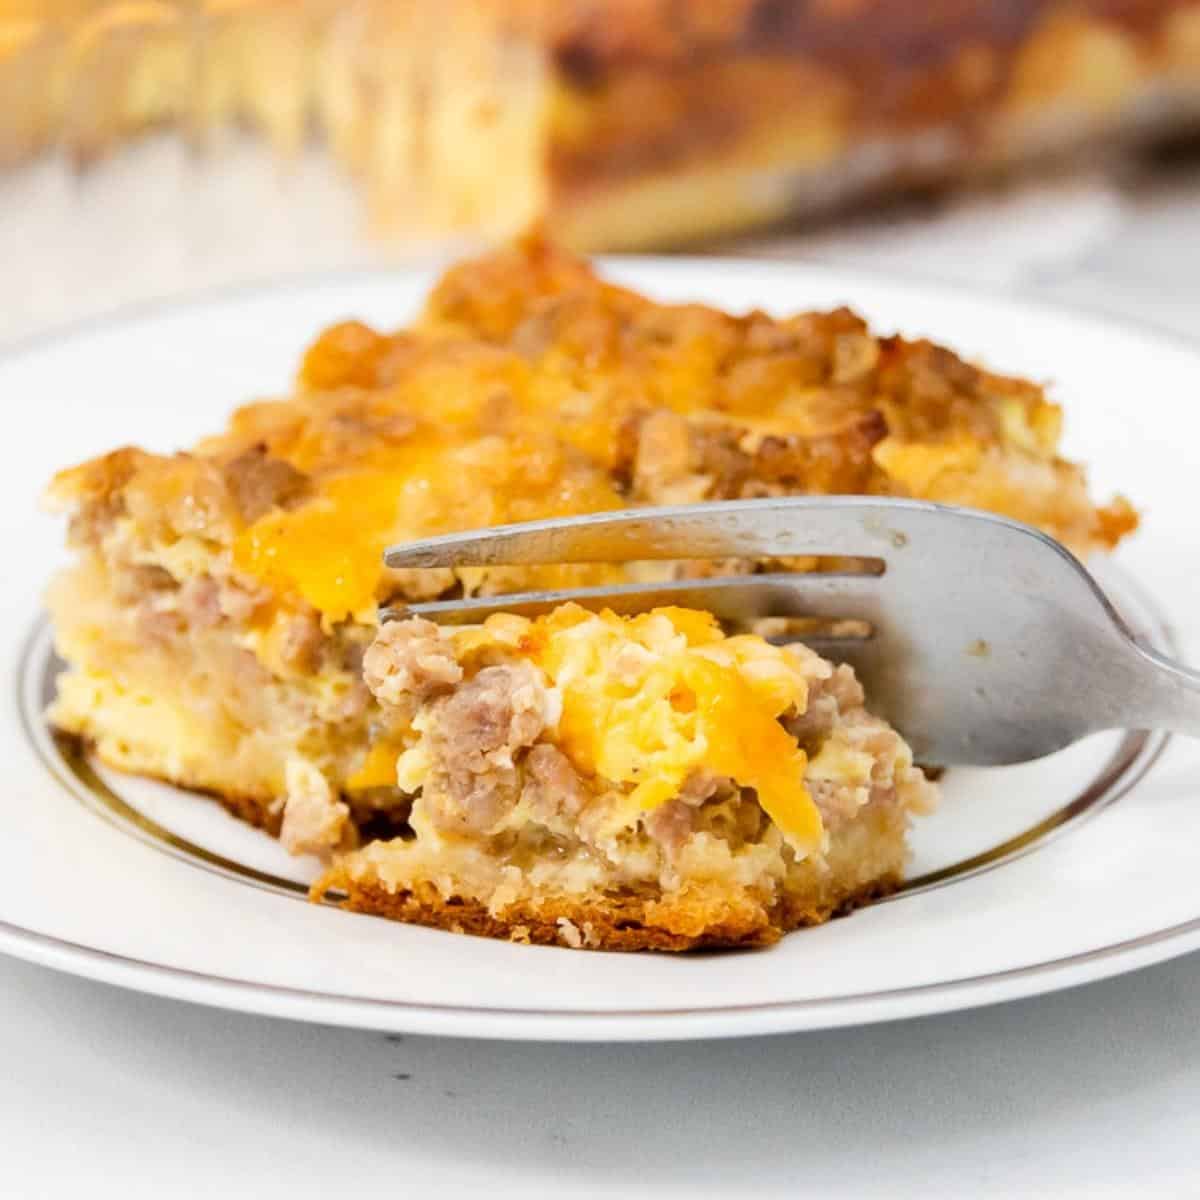 Featured image with fork and breakfast casserole on a white plate.